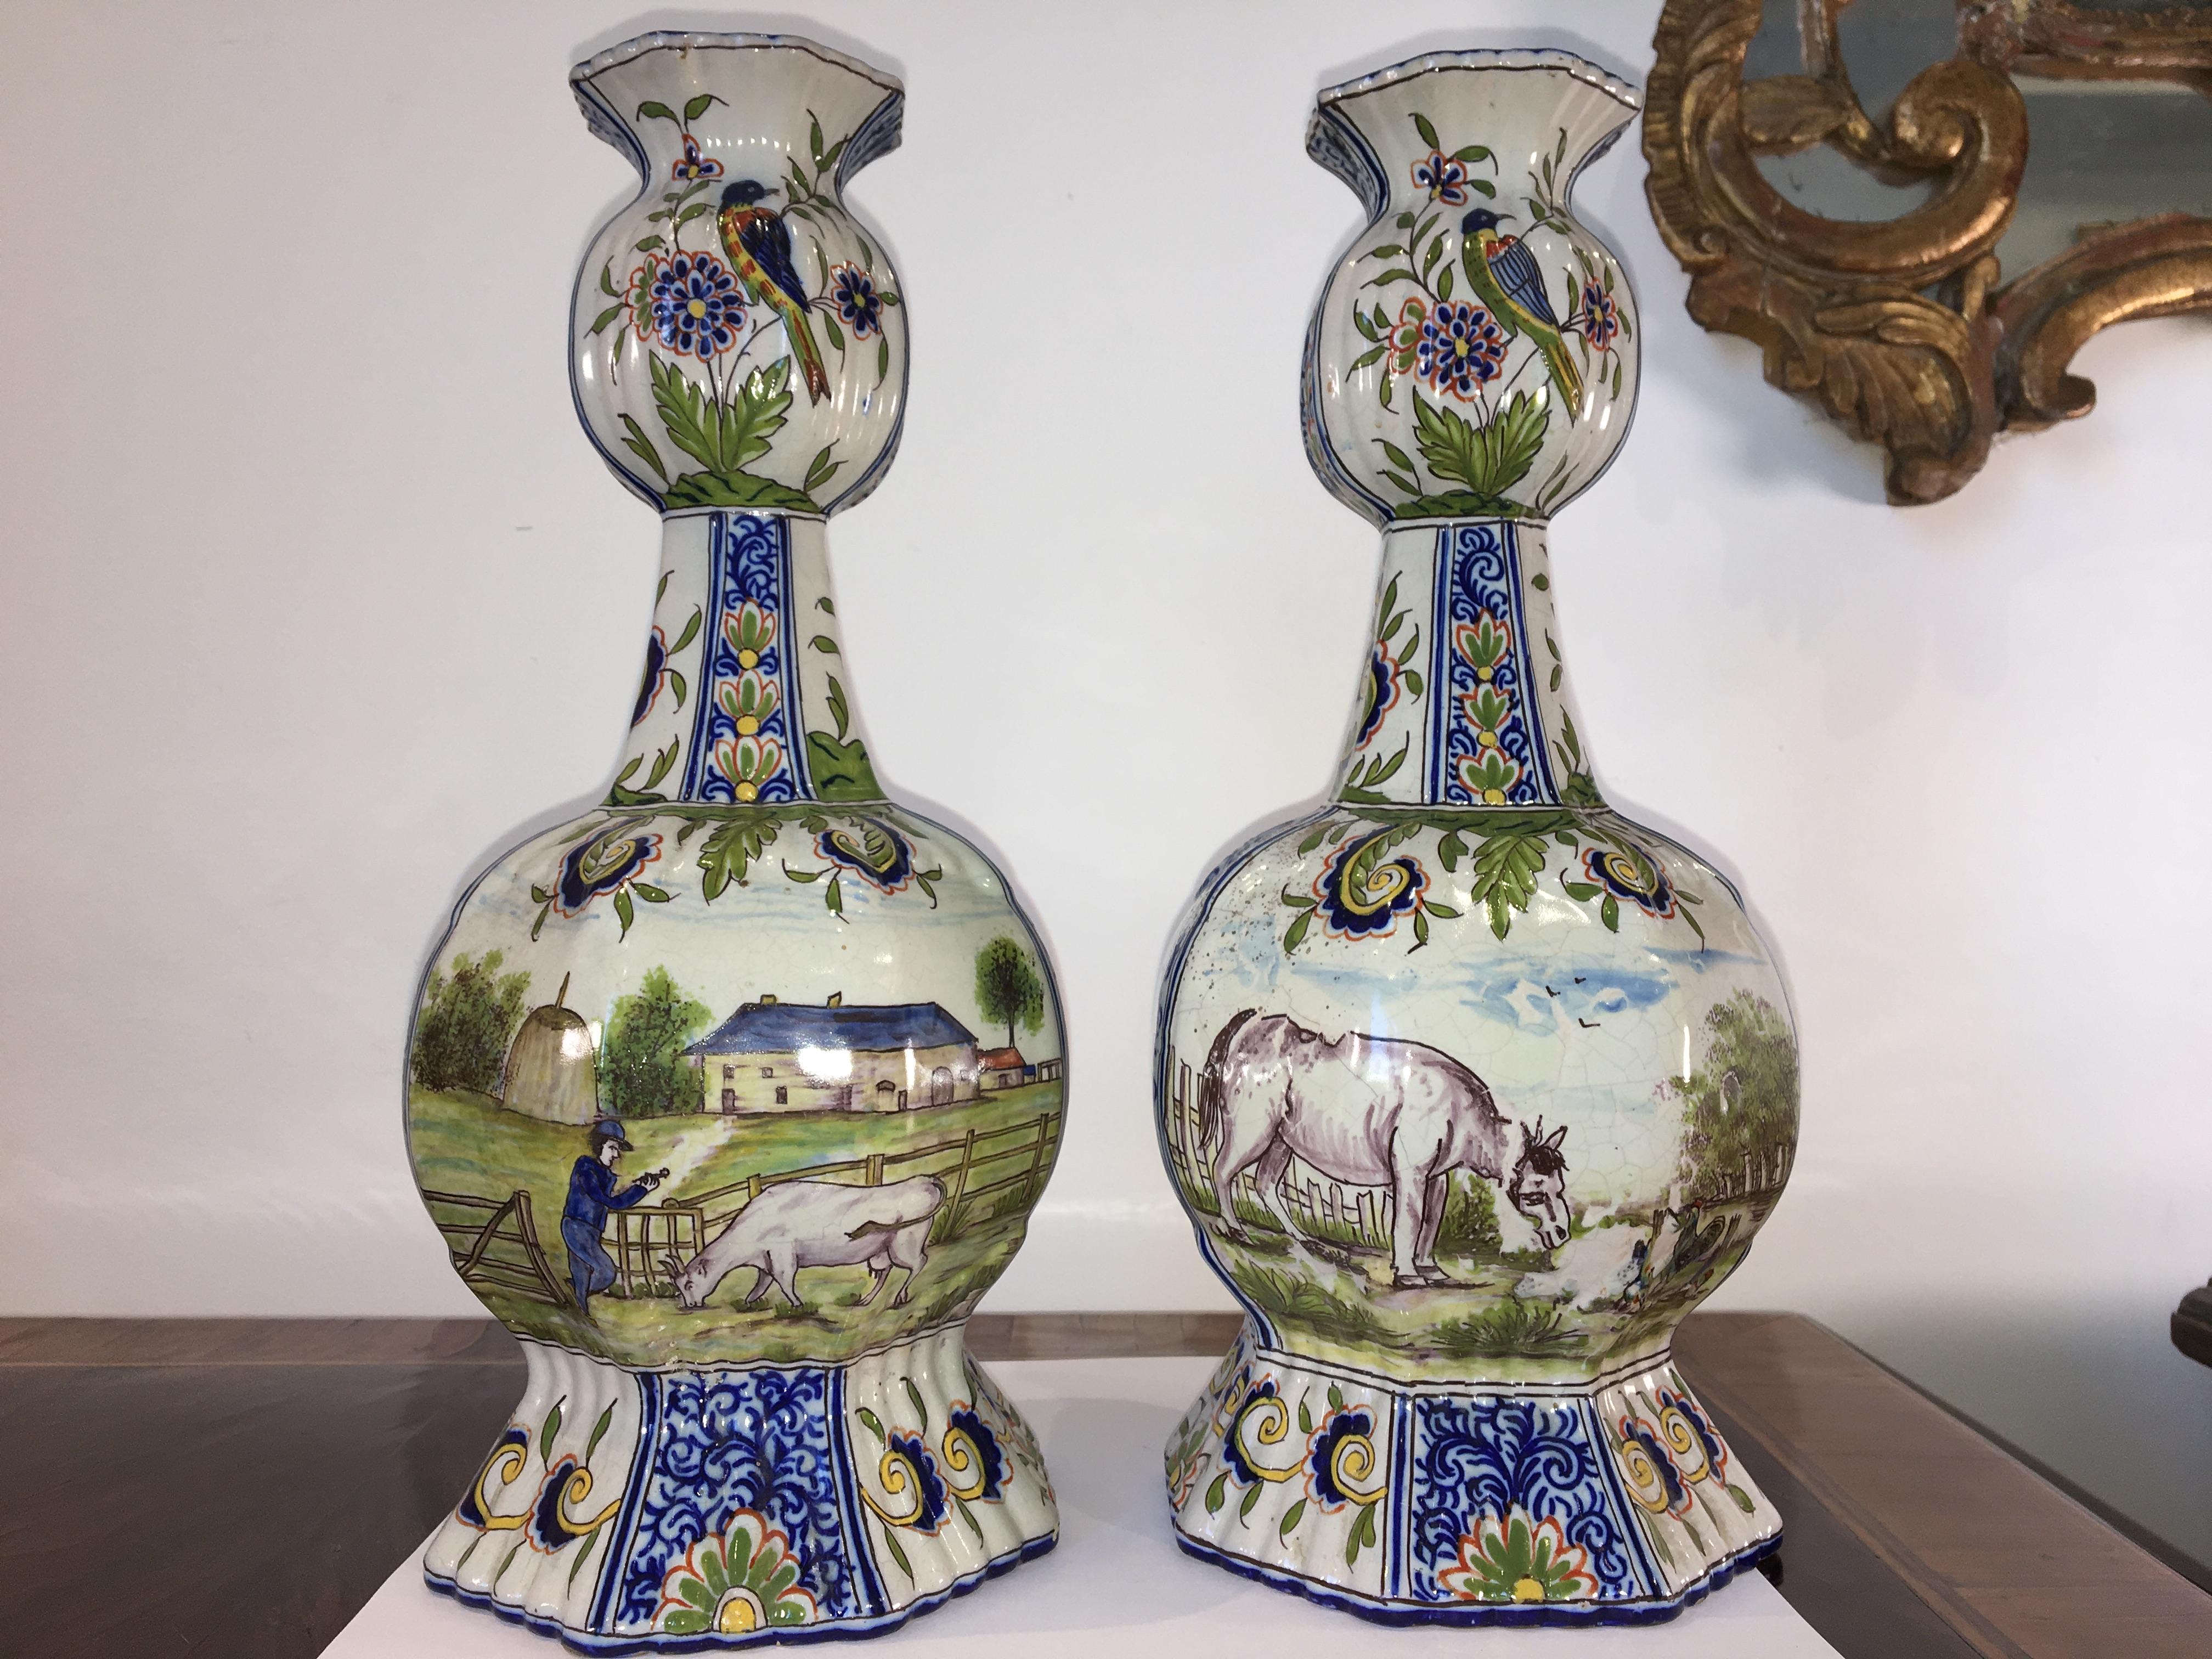 Pair of exceptional polychrome 18th-19th century delft vases with rare equestrian scenes, marked. The top portion of the vase features birds and flowers, the larger features riders, horses, and hounds on one side, cows, farm scenes on the reverse,